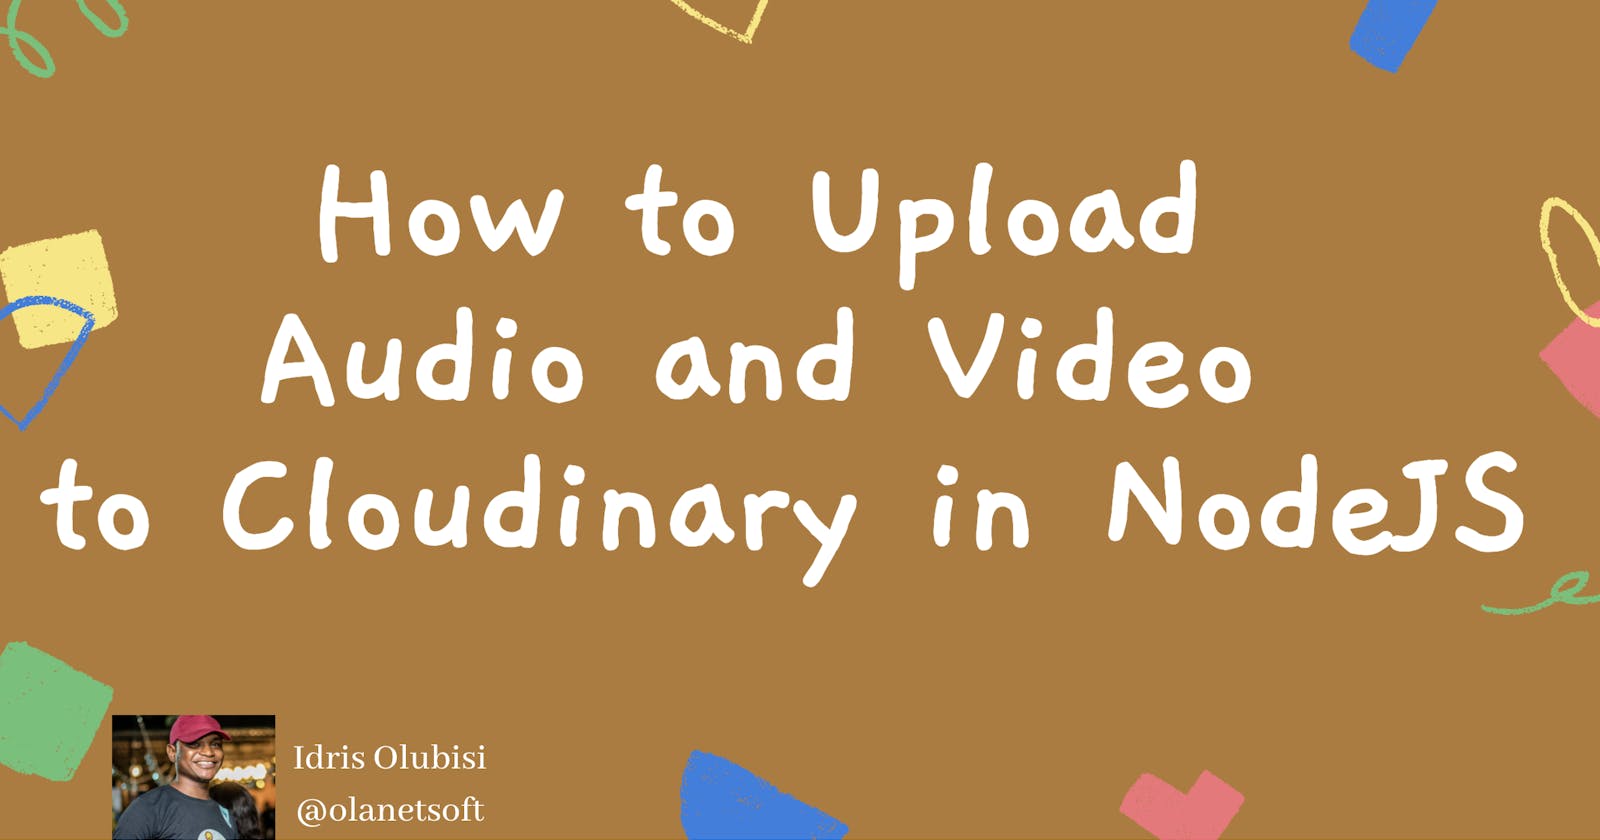 How to Upload Audio and Video to Cloudinary in Nodejs